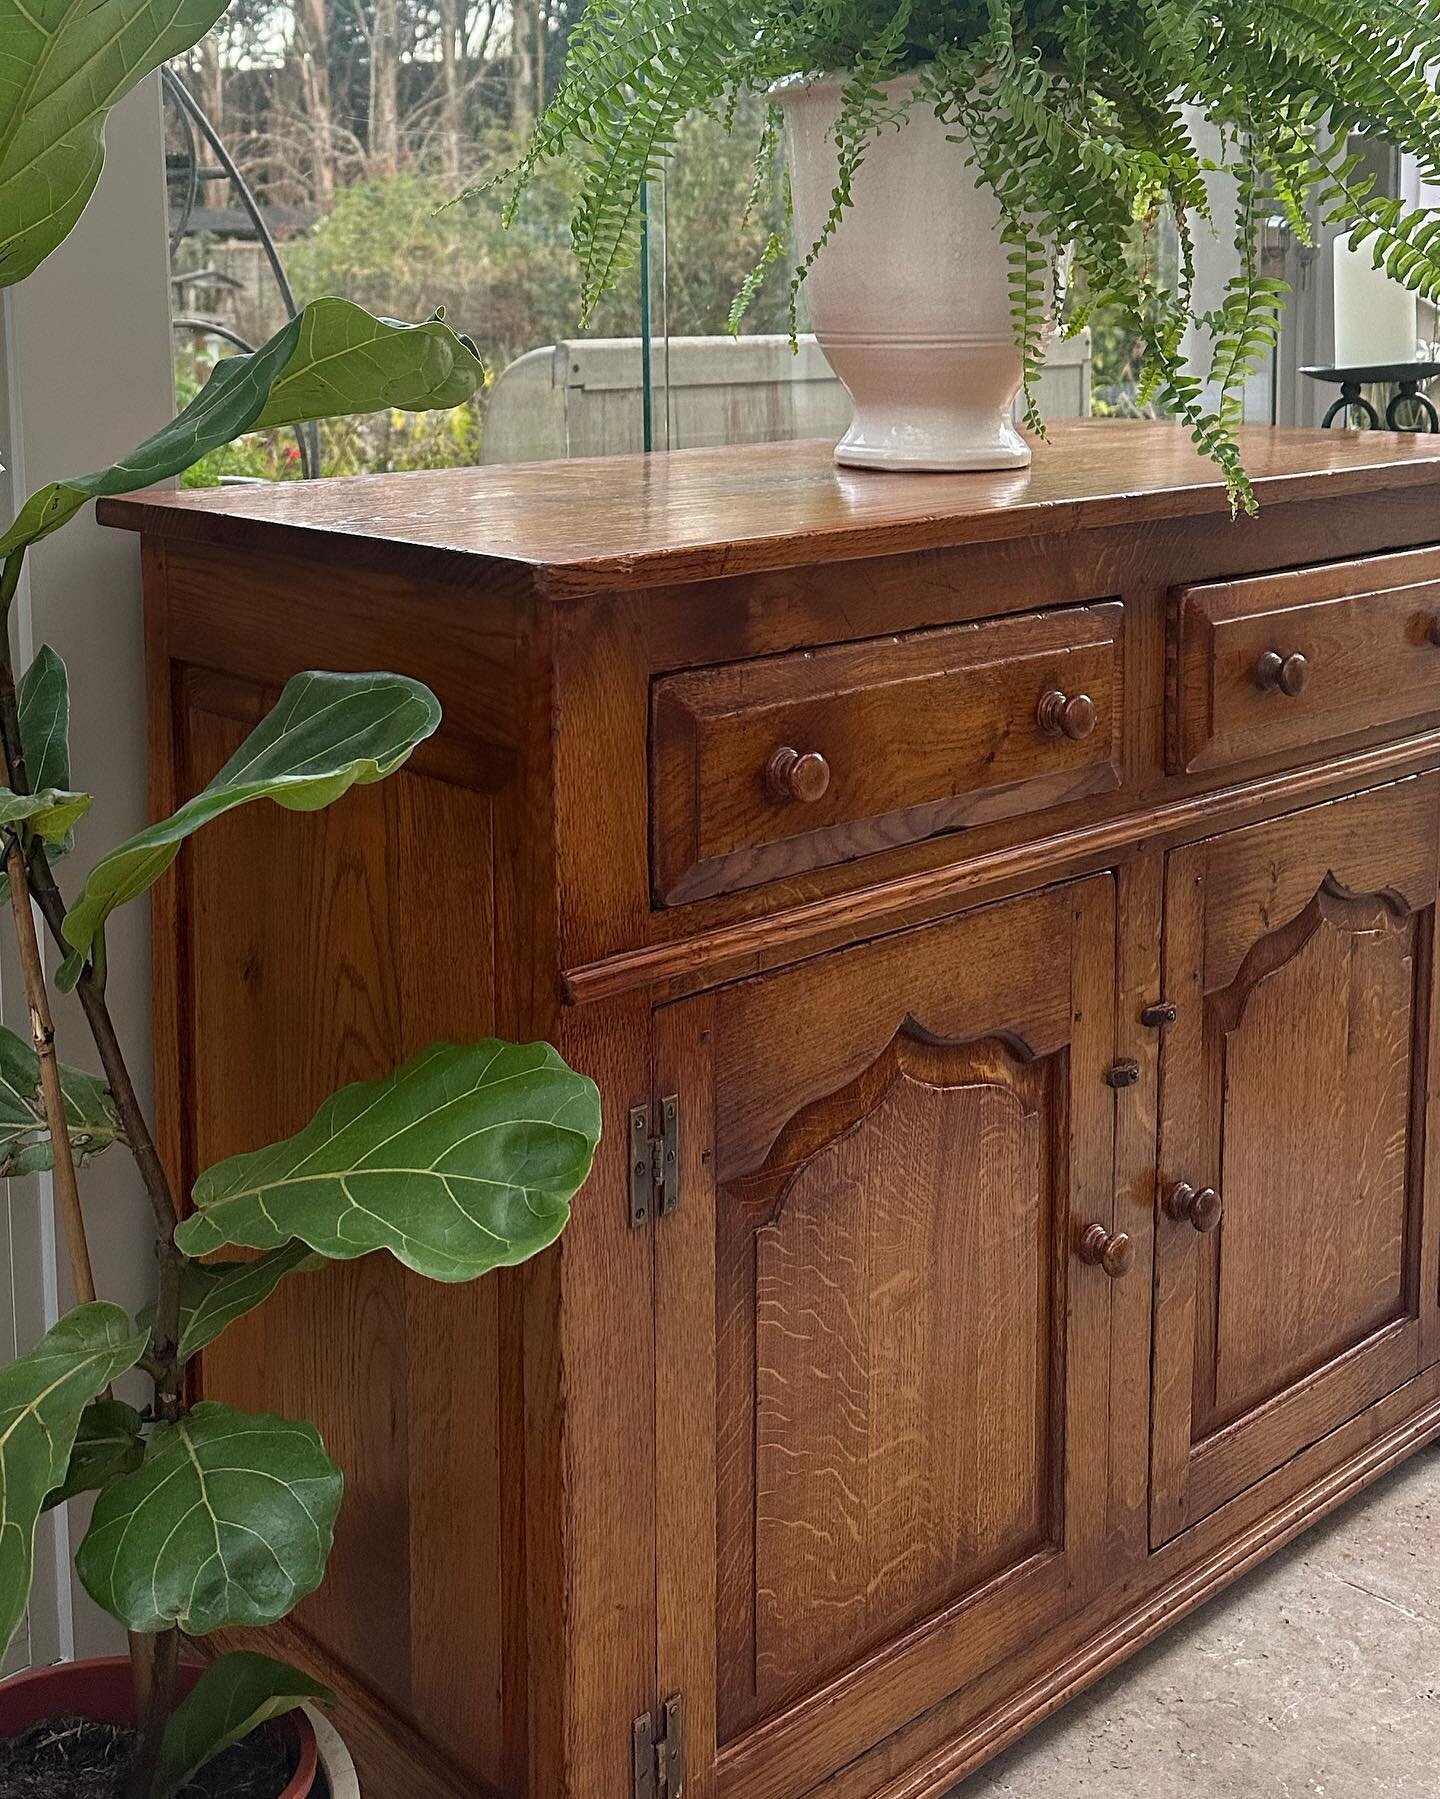 A quality vintage oak sideboard bringing a touch of charm and practical elegance to any space it graces ~ Now Available 🧡 #solidoak #qualityfurniture #diningroomfurniture #storagespace #oakcupboard #oaksideboard #vintagefurniture #vintagedecor #stor